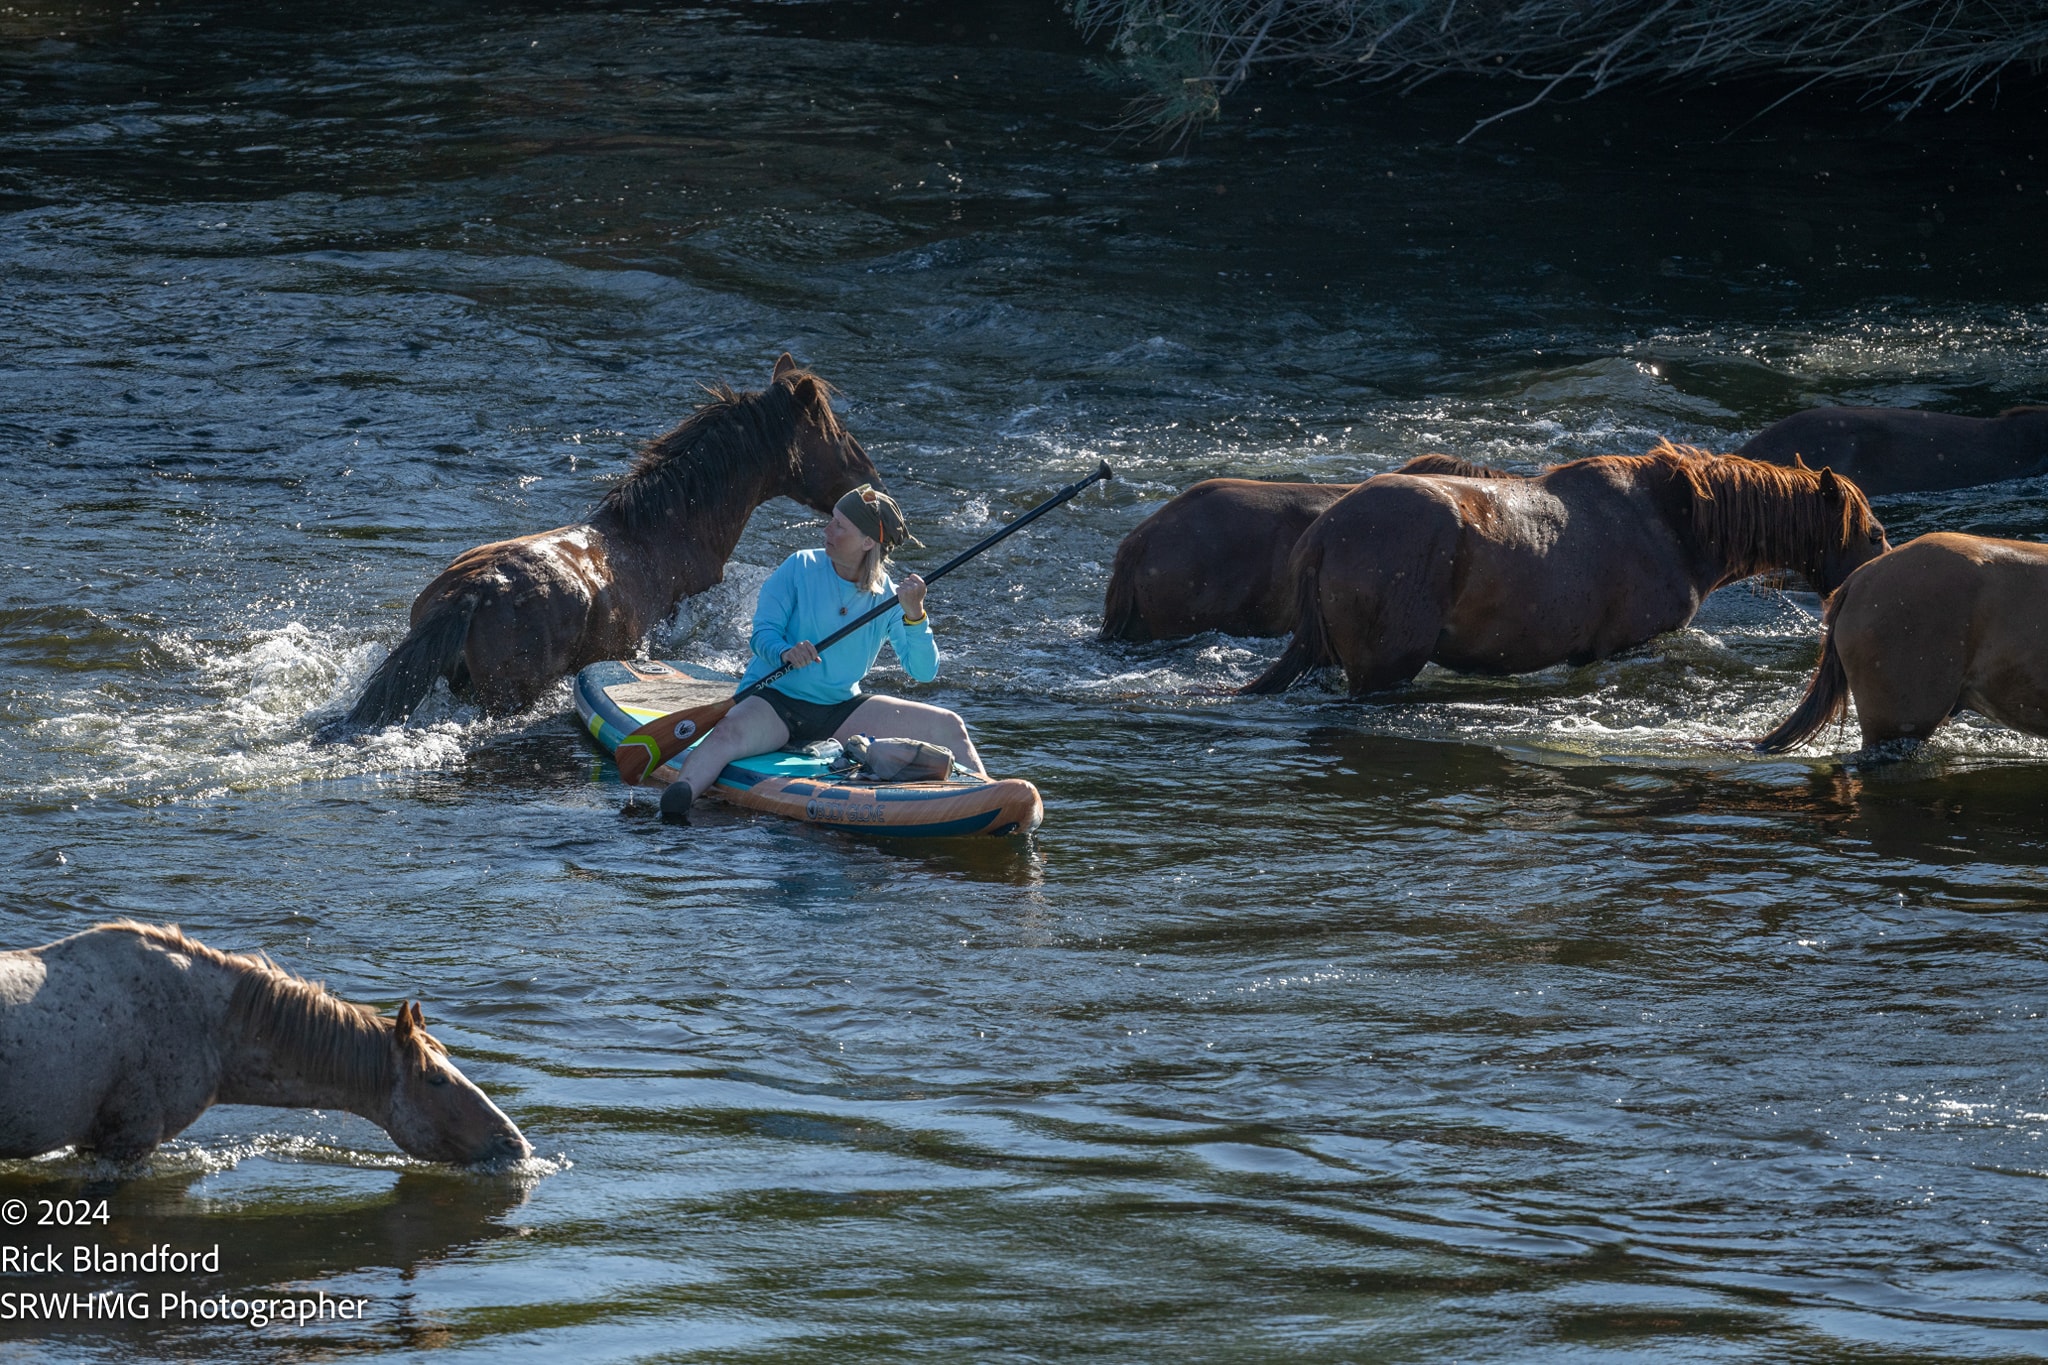 Oops! Here’s how to steer clear of wild horses when paddling the lower Salt River.